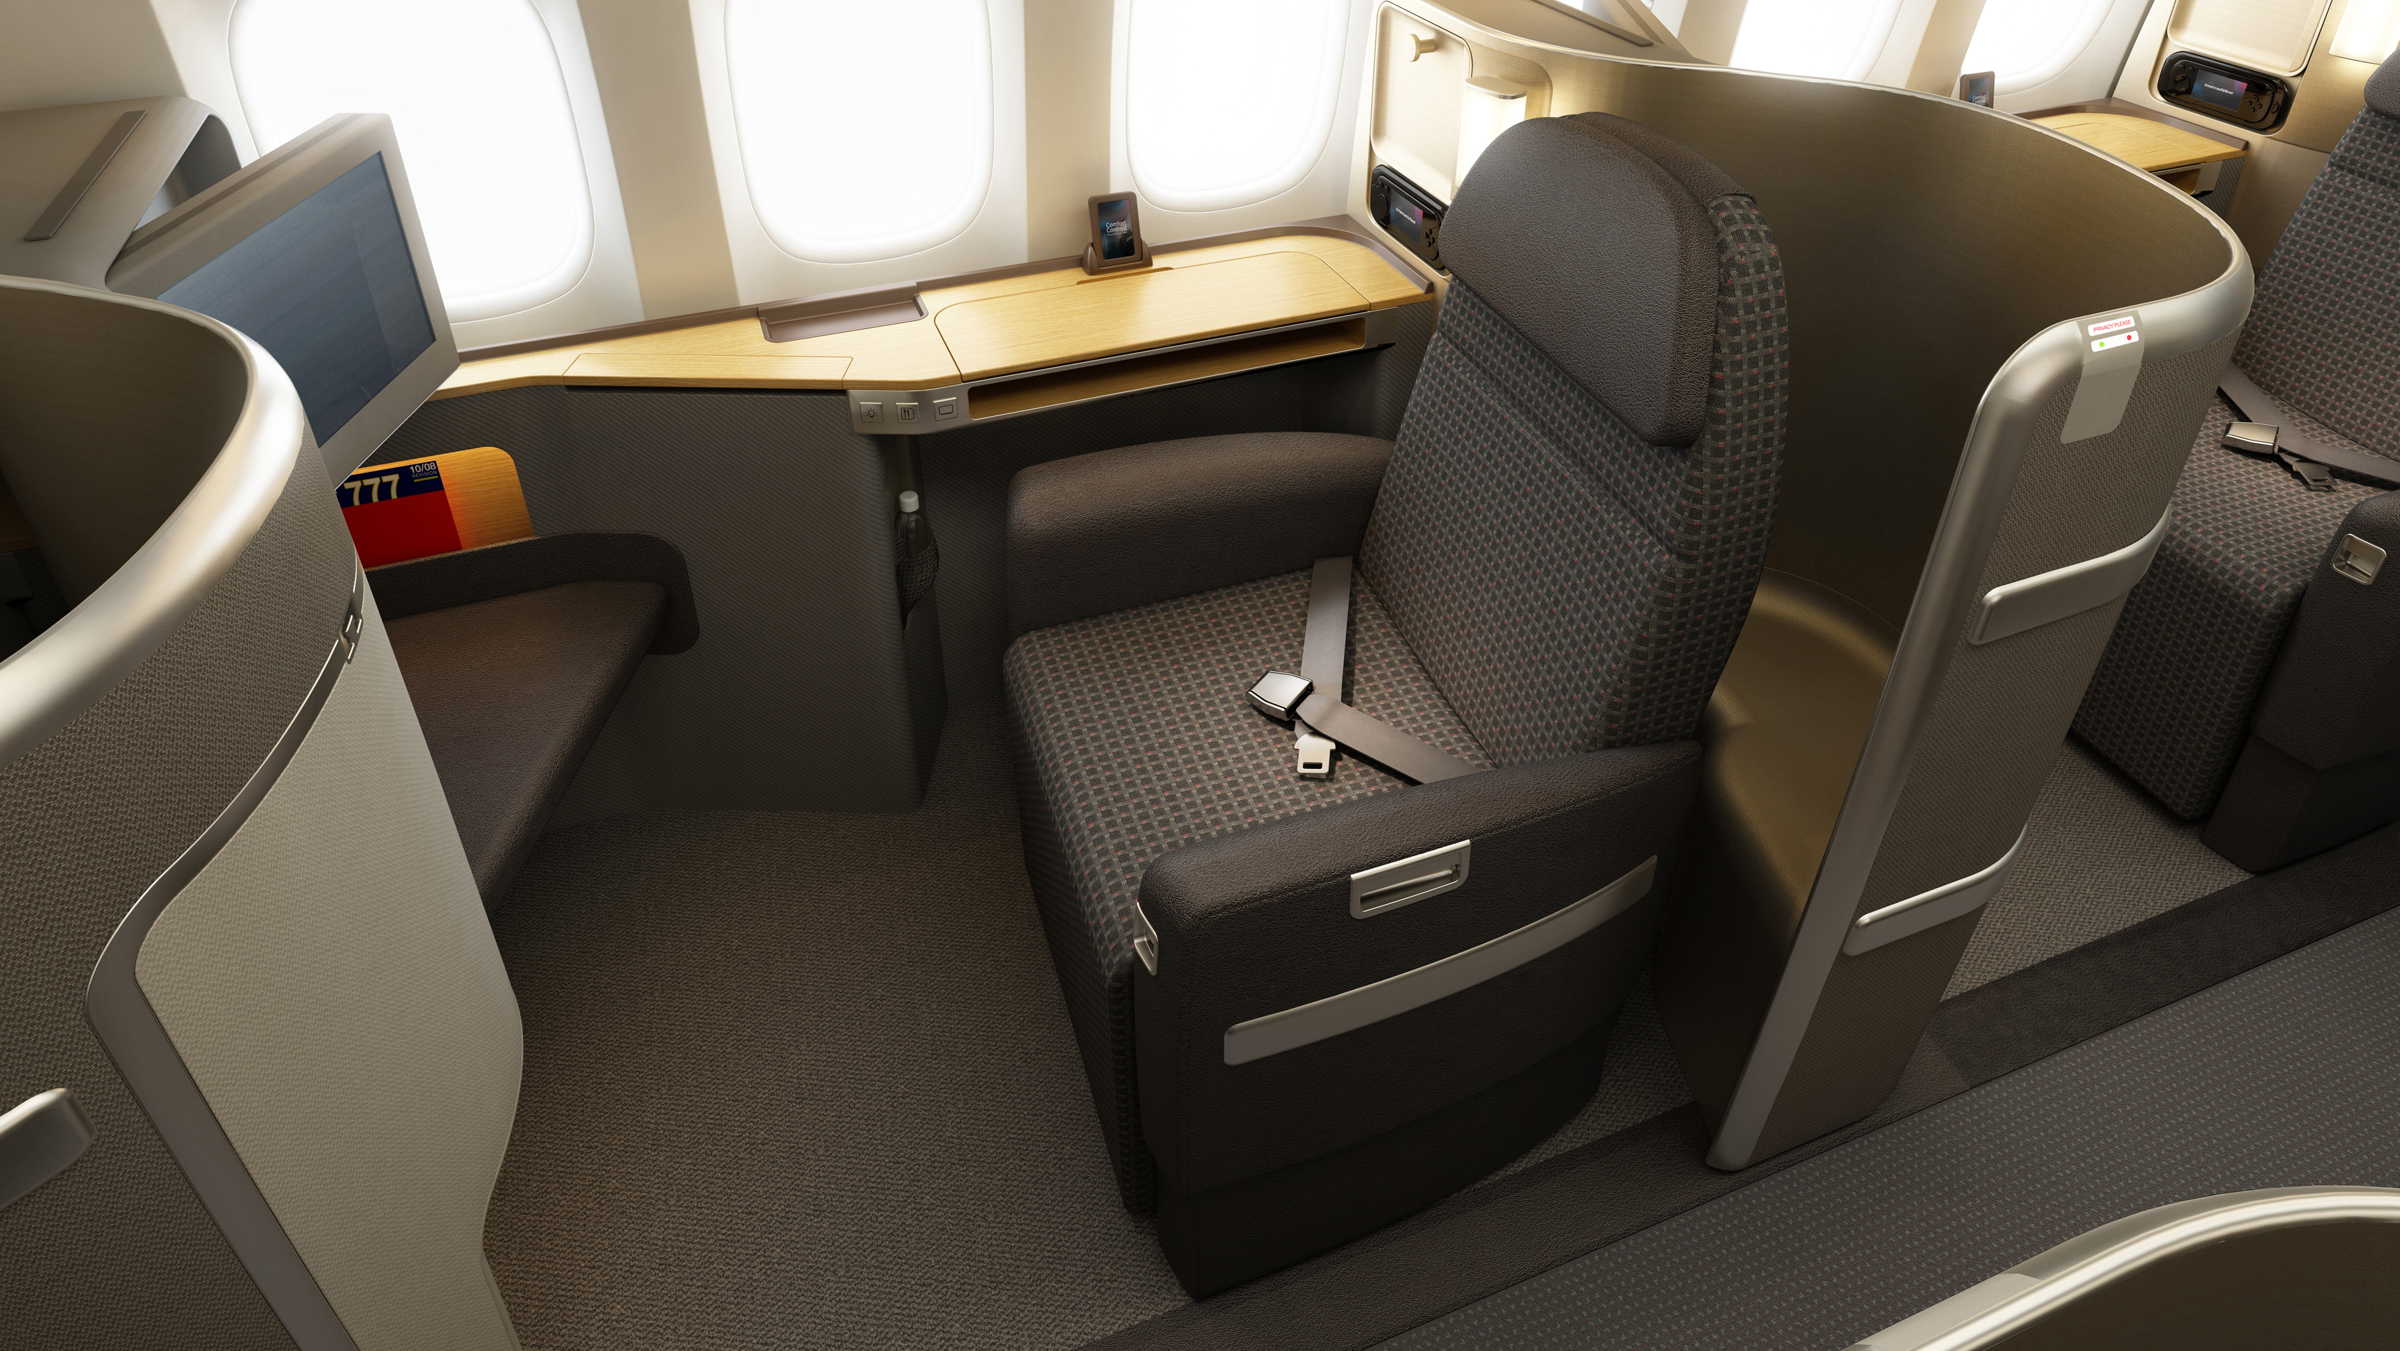 American Airlines Boeing 777-300ER First Class (Image: American Airlines)